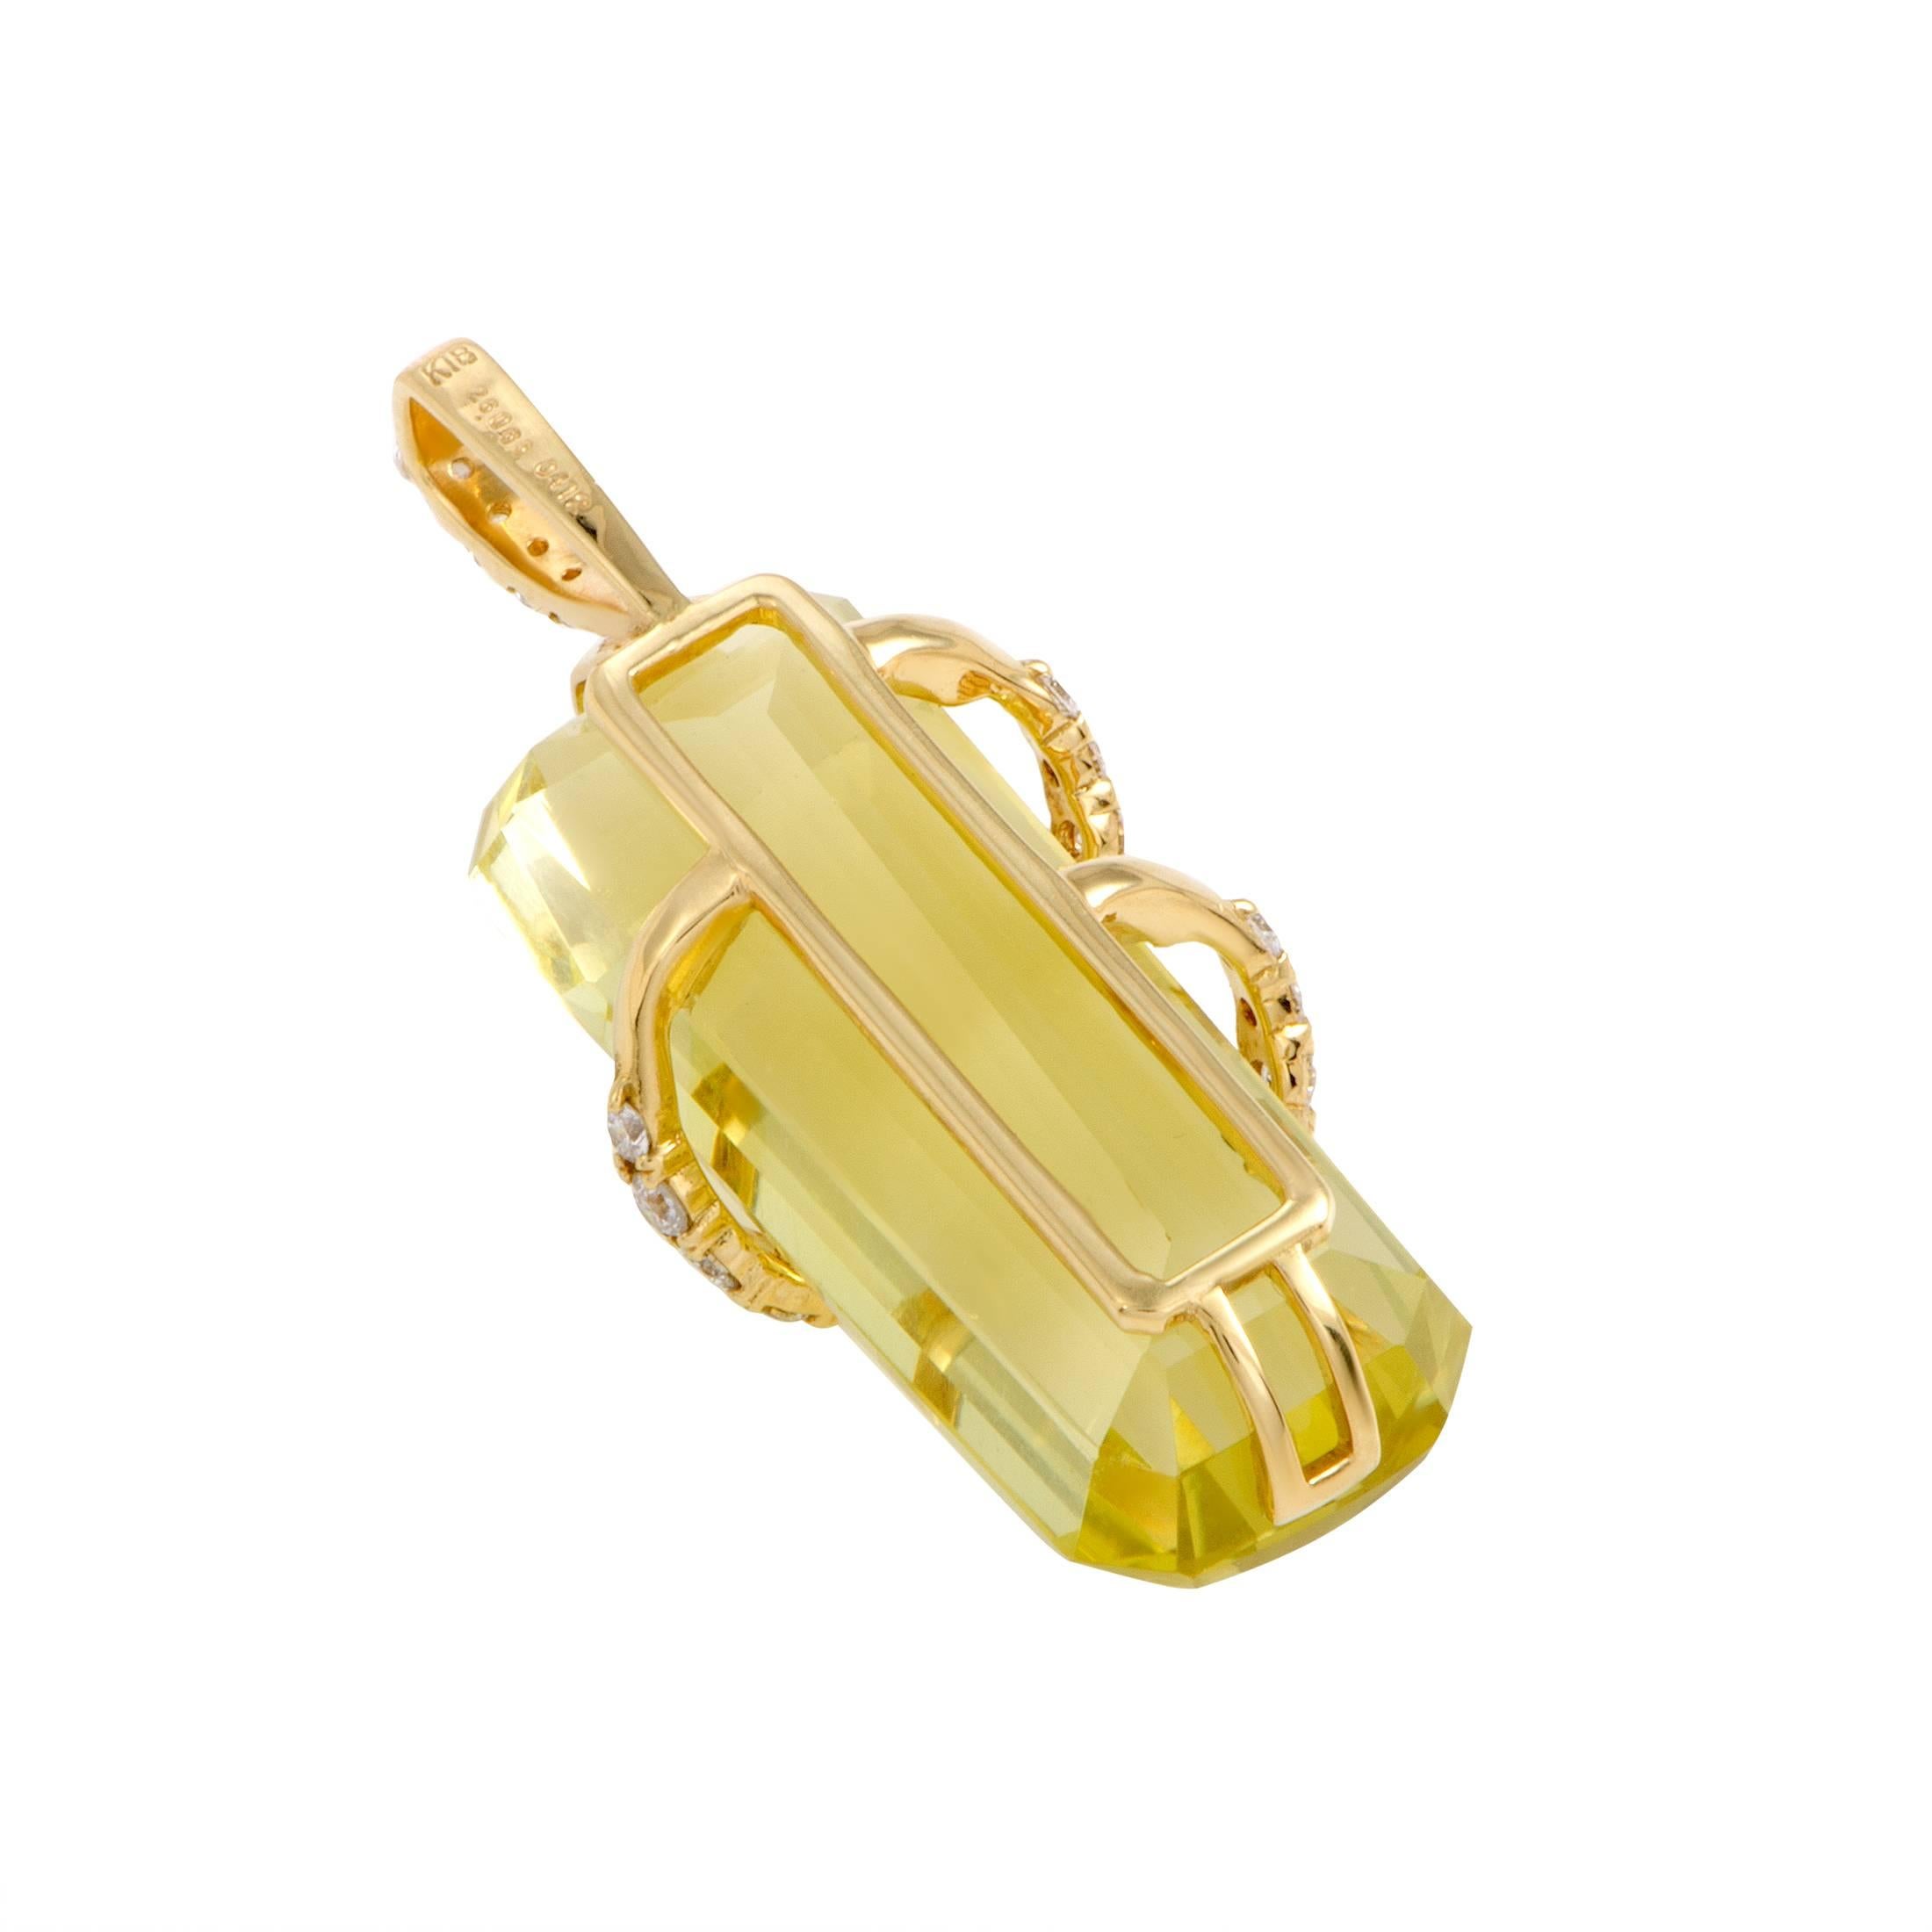 Crafted from radiant 18K yellow gold and set with a splendidly cut lemon citrine, this gorgeous pendant offers a delightfully vivacious, feminine appearance. The citrine weighs 26.06 carats and it is accentuated with glistening diamond stones that